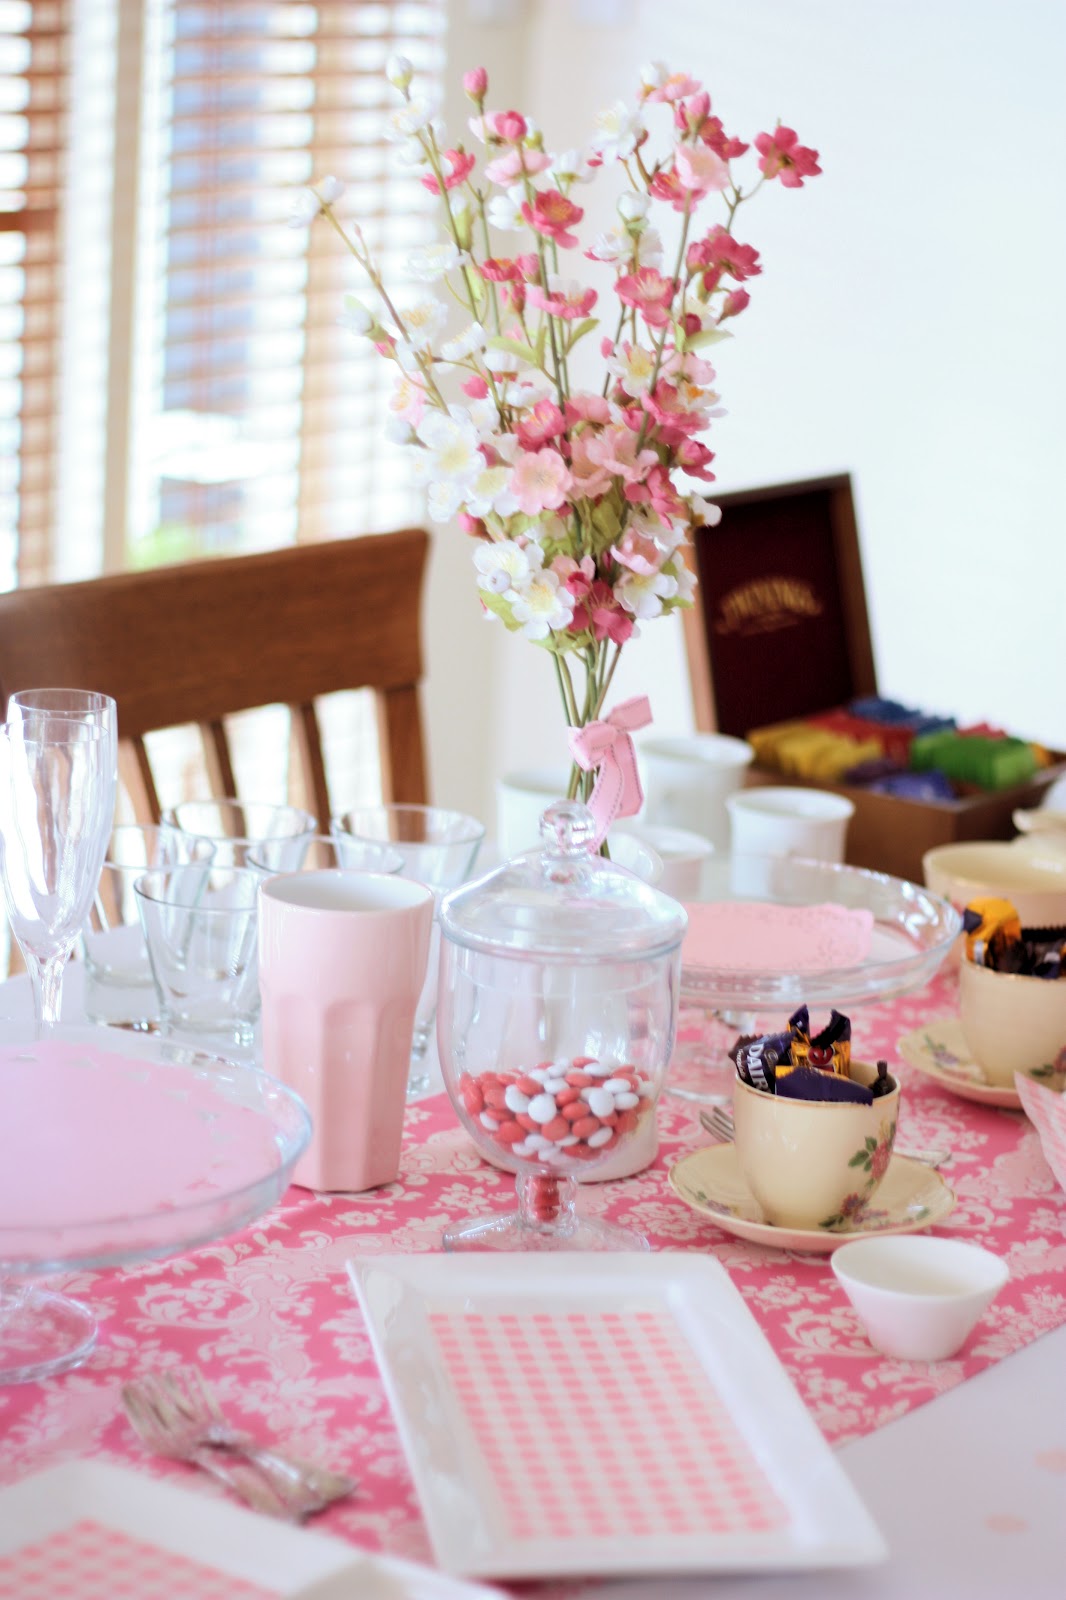 A Mothers Day Celebration - A Spoonful of Sugar